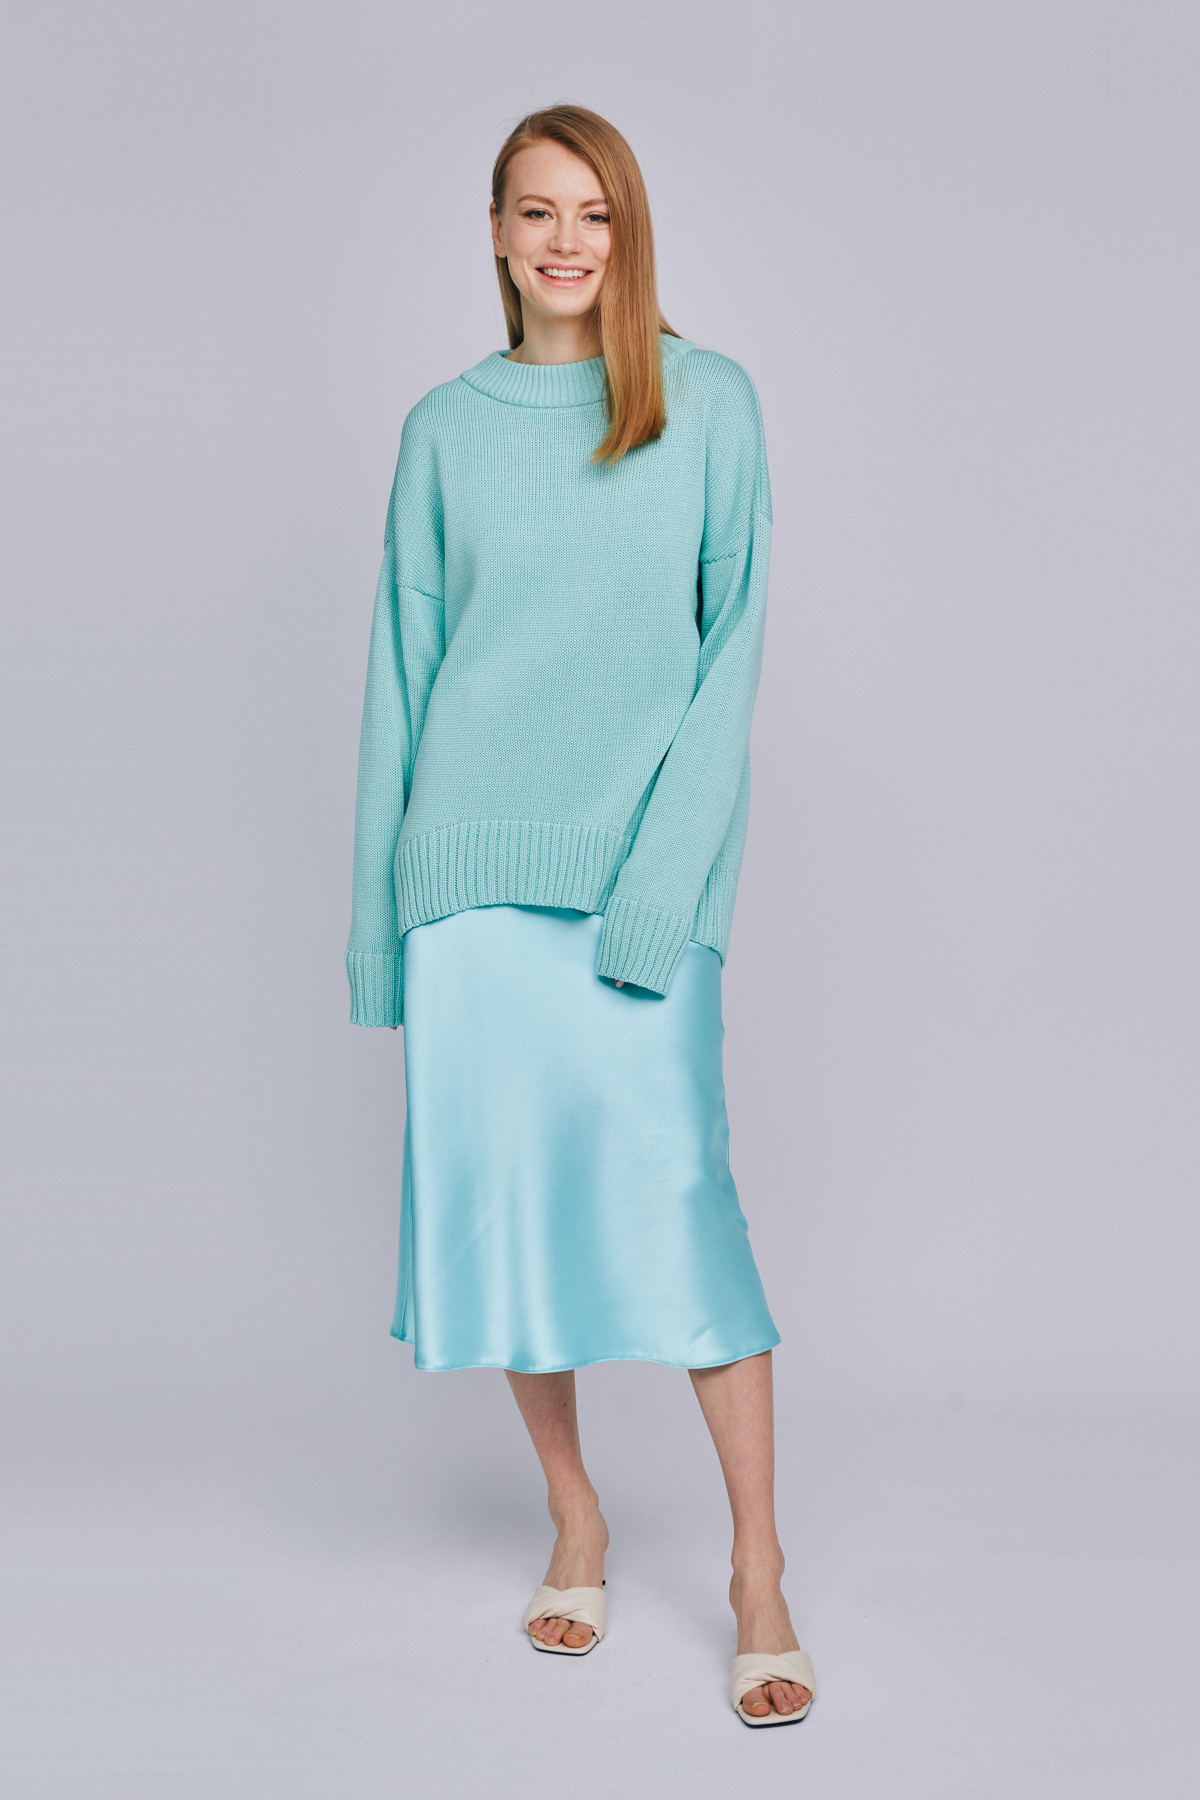 Mint knitted cotton sweater, photo 3